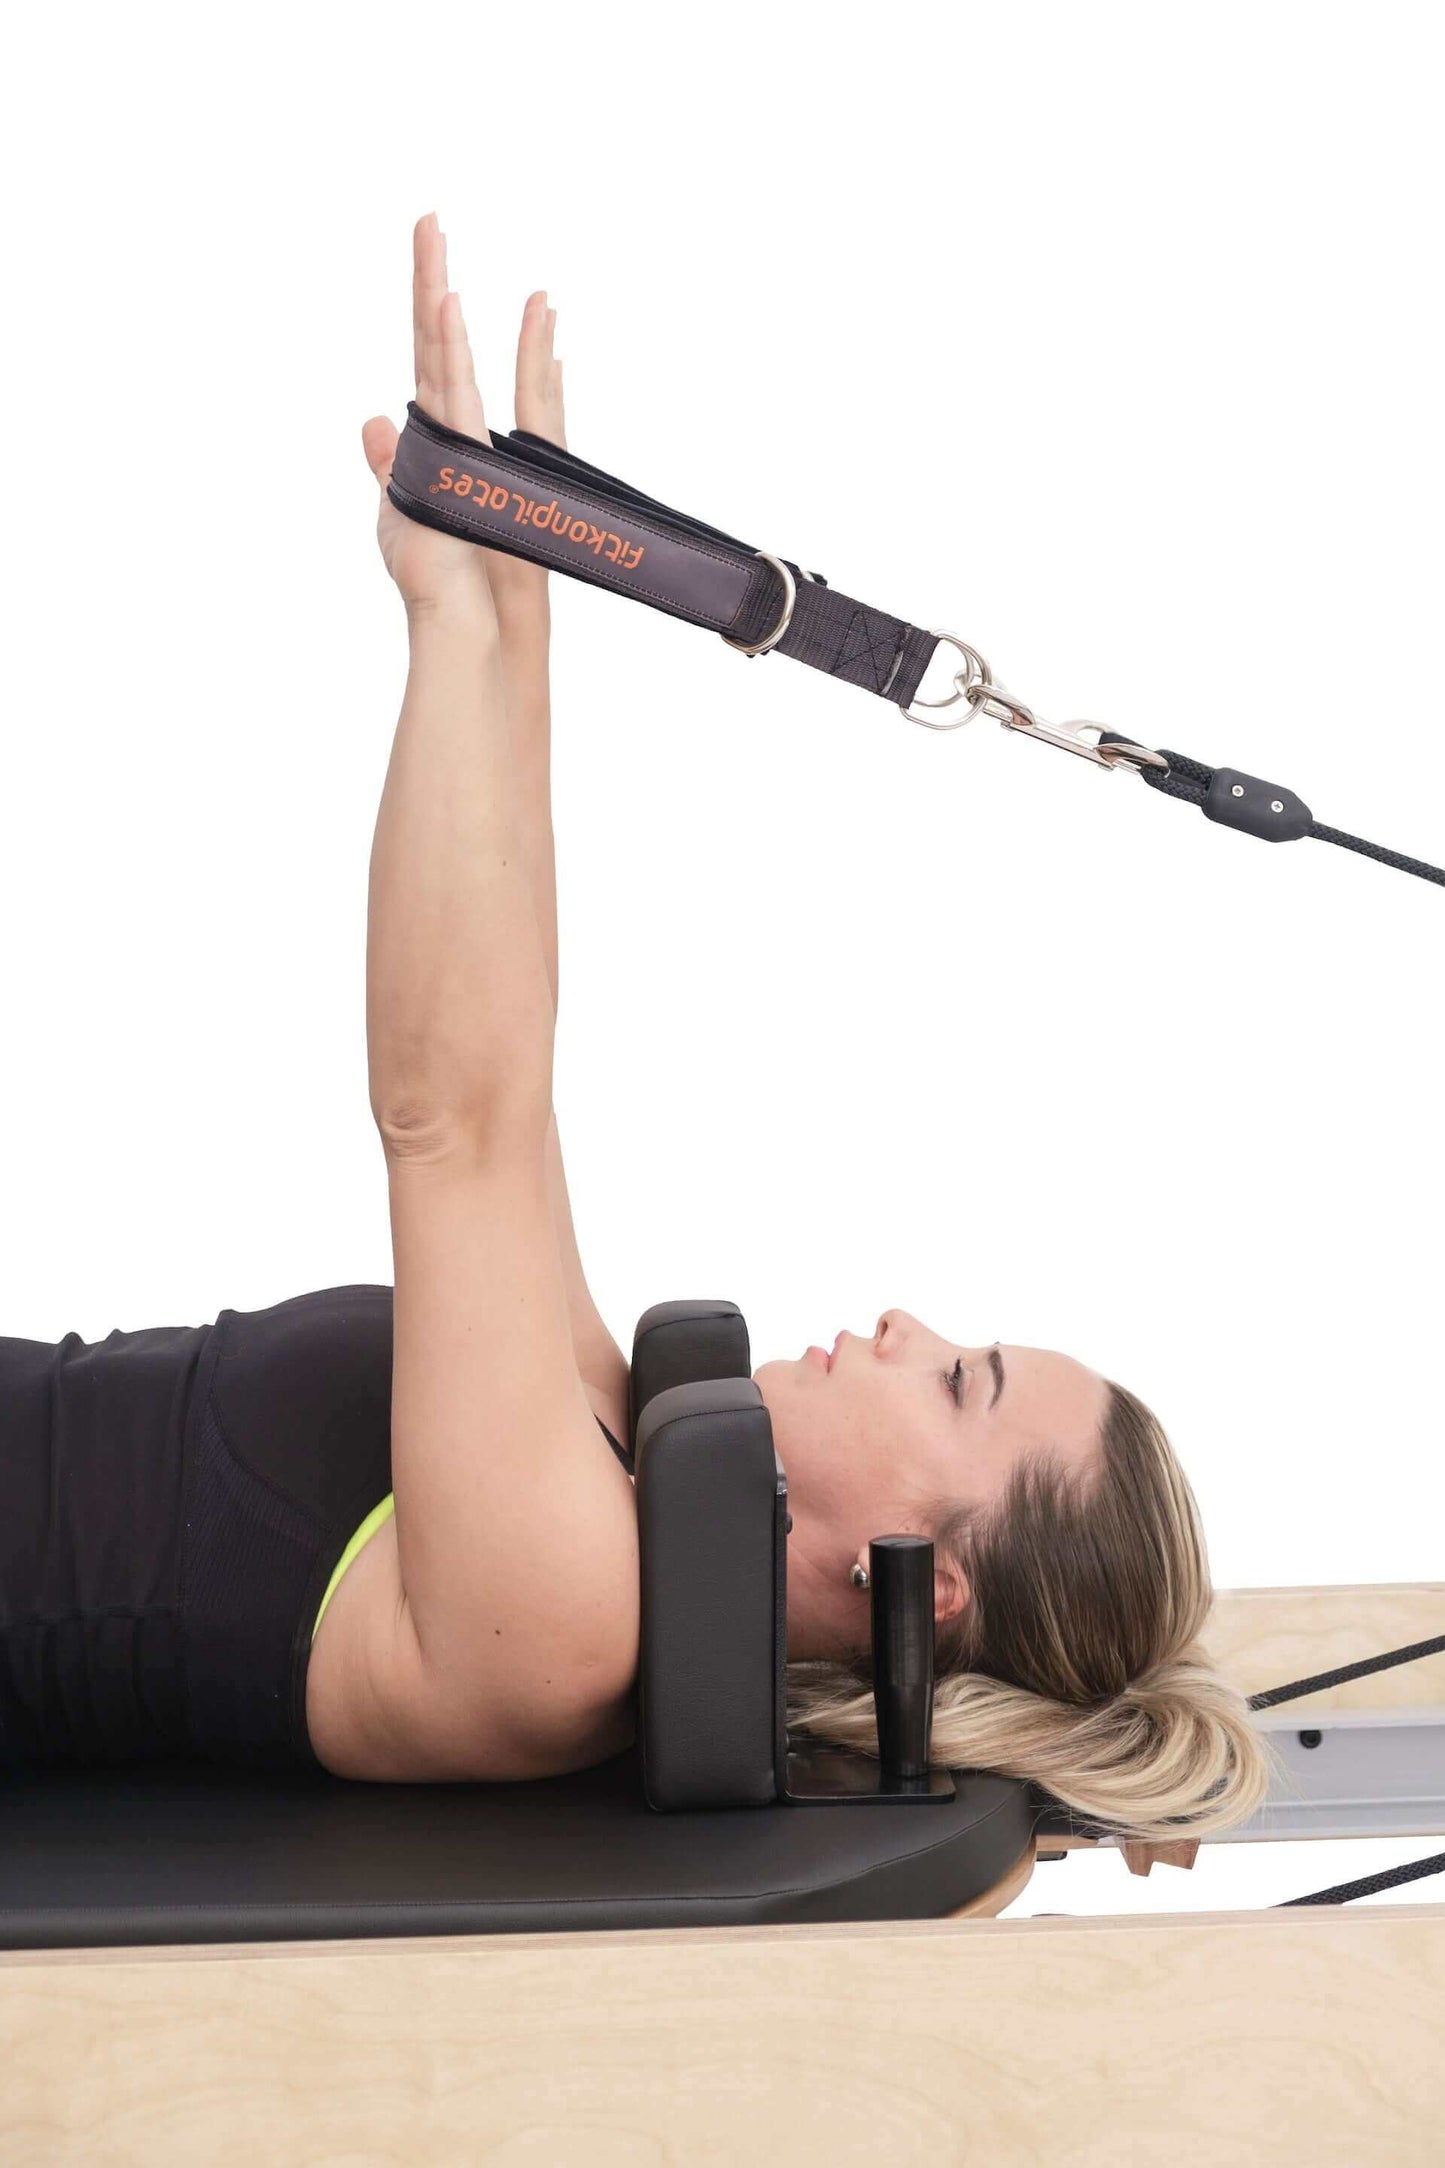  Fitkon Pilates Combo Cadillac-Reformer Machine by Fitkon sold by Pilates Matters® by BSP LLC